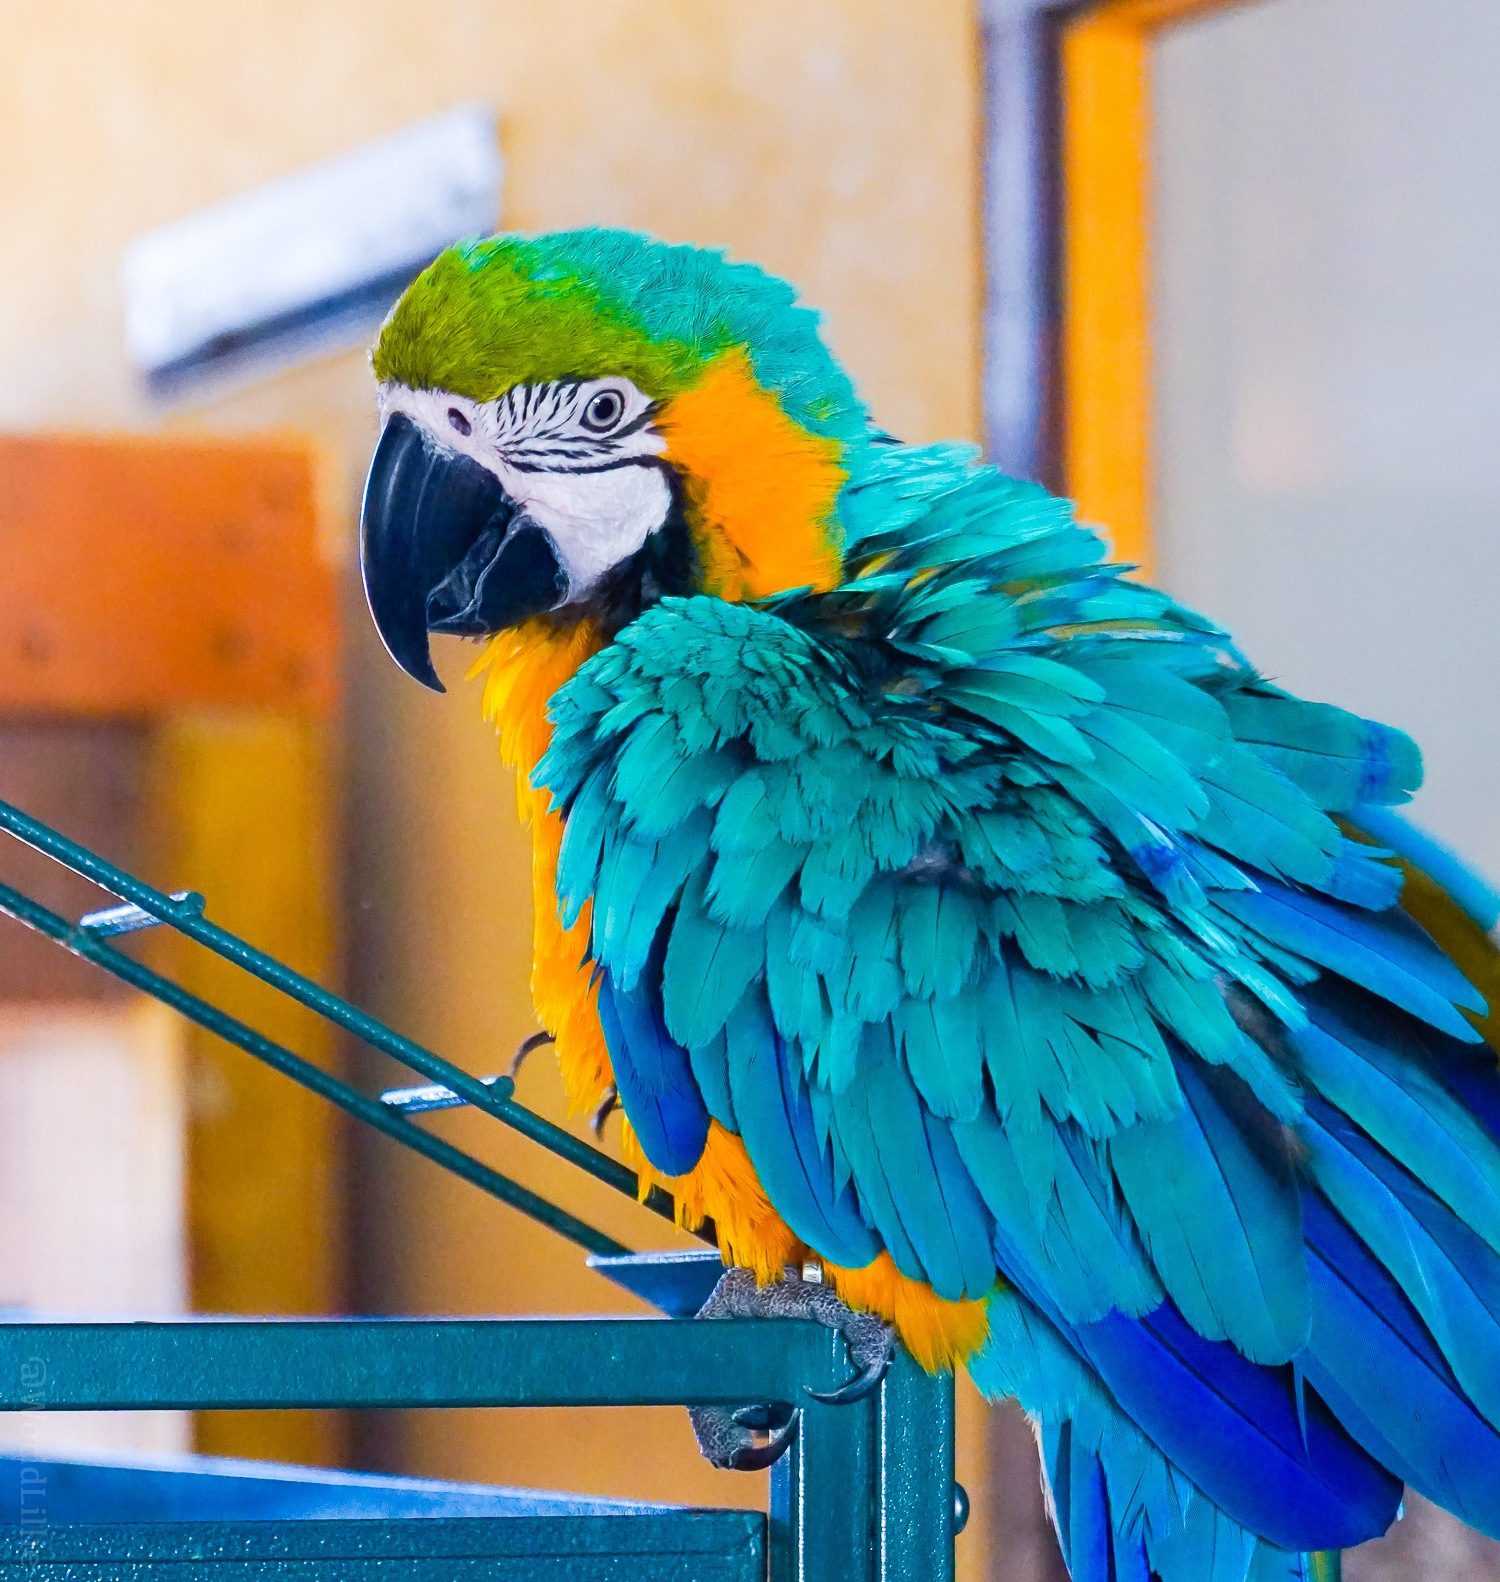 A beautiful teal parrot at the Ostrich Farm, east of Willemstad.